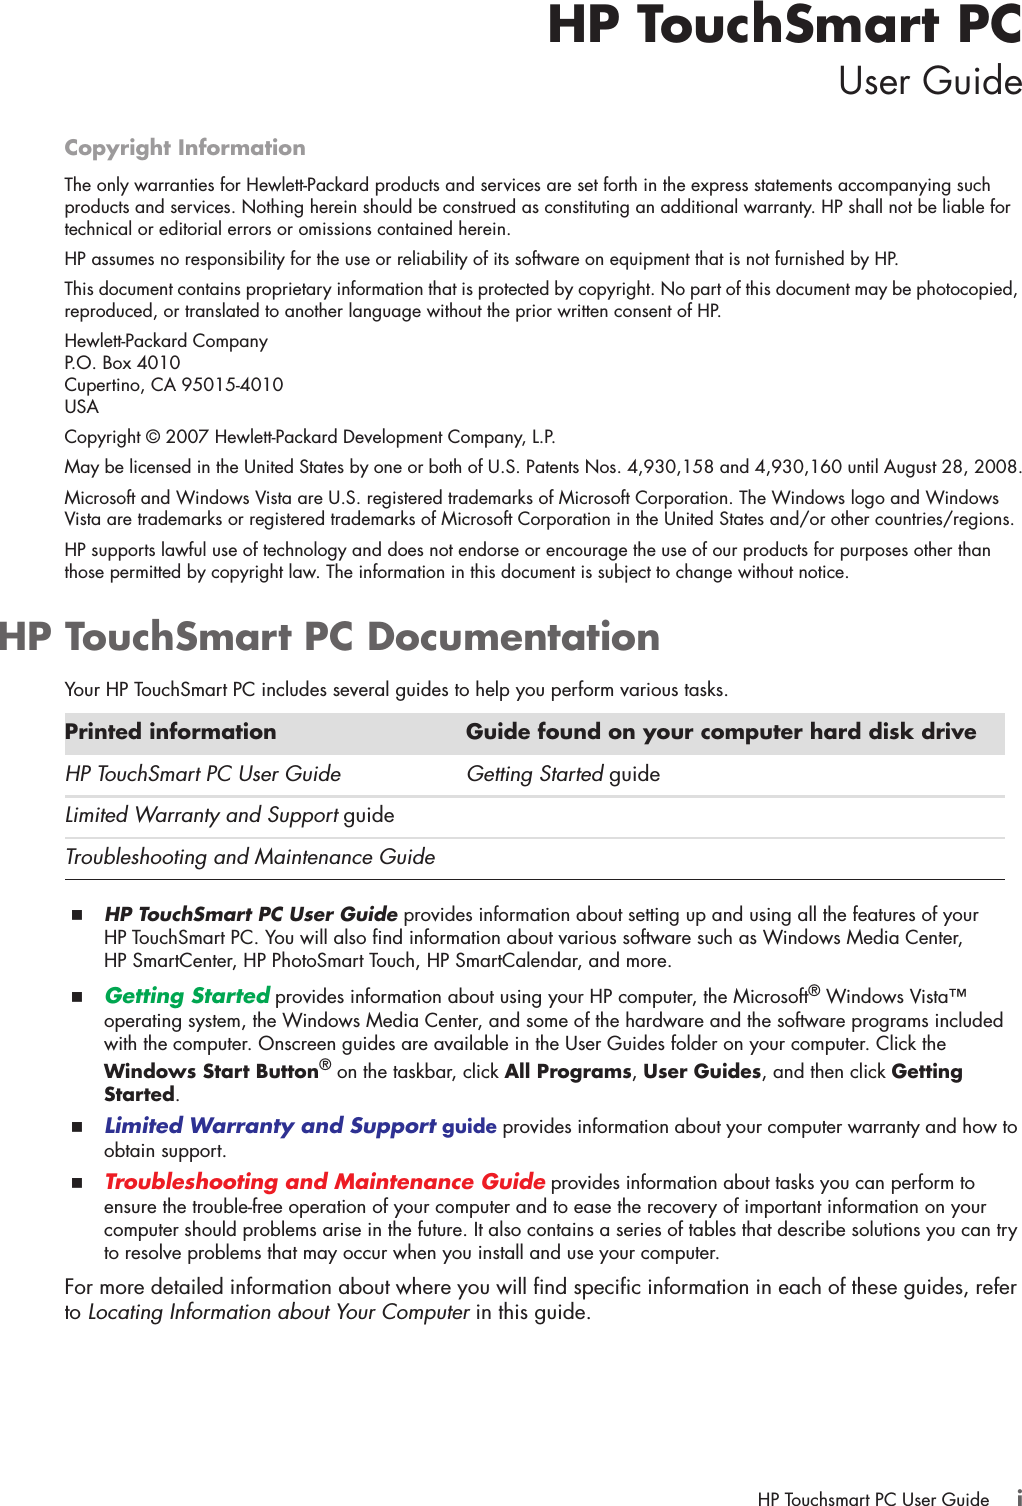 HP Touchsmart PC User Guide iHP TouchSmart PCUser GuideCopyright InformationThe only warranties for Hewlett-Packard products and services are set forth in the express statements accompanying such products and services. Nothing herein should be construed as constituting an additional warranty. HP shall not be liable for technical or editorial errors or omissions contained herein.HP assumes no responsibility for the use or reliability of its software on equipment that is not furnished by HP.This document contains proprietary information that is protected by copyright. No part of this document may be photocopied, reproduced, or translated to another language without the prior written consent of HP.Hewlett-Packard CompanyP.O. Box 4010Cupertino, CA 95015-4010USACopyright © 2007 Hewlett-Packard Development Company, L.P.May be licensed in the United States by one or both of U.S. Patents Nos. 4,930,158 and 4,930,160 until August 28, 2008.Microsoft and Windows Vista are U.S. registered trademarks of Microsoft Corporation. The Windows logo and Windows Vista are trademarks or registered trademarks of Microsoft Corporation in the United States and/or other countries/regions.HP supports lawful use of technology and does not endorse or encourage the use of our products for purposes other than those permitted by copyright law. The information in this document is subject to change without notice.HP TouchSmart PC DocumentationYour HP TouchSmart PC includes several guides to help you perform various tasks.HP TouchSmart PC User Guide provides information about setting up and using all the features of your HP TouchSmart PC. You will also find information about various software such as Windows Media Center, HP SmartCenter, HP PhotoSmart Touch, HP SmartCalendar, and more.Getting Started provides information about using your HP computer, the Microsoft® Windows Vista™ operating system, the Windows Media Center, and some of the hardware and the software programs included with the computer. Onscreen guides are available in the User Guides folder on your computer. Click the Windows Start Button® on the taskbar, click All Programs, User Guides, and then click Getting Started.Limited Warranty and Support guide provides information about your computer warranty and how to obtain support. Troubleshooting and Maintenance Guide provides information about tasks you can perform to ensure the trouble-free operation of your computer and to ease the recovery of important information on your computer should problems arise in the future. It also contains a series of tables that describe solutions you can try to resolve problems that may occur when you install and use your computer. For more detailed information about where you will find specific information in each of these guides, refer to Locating Information about Your Computer in this guide.Printed information Guide found on your computer hard disk driveHP TouchSmart PC User Guide Getting Started guideLimited Warranty and Support guideTroubleshooting and Maintenance Guide